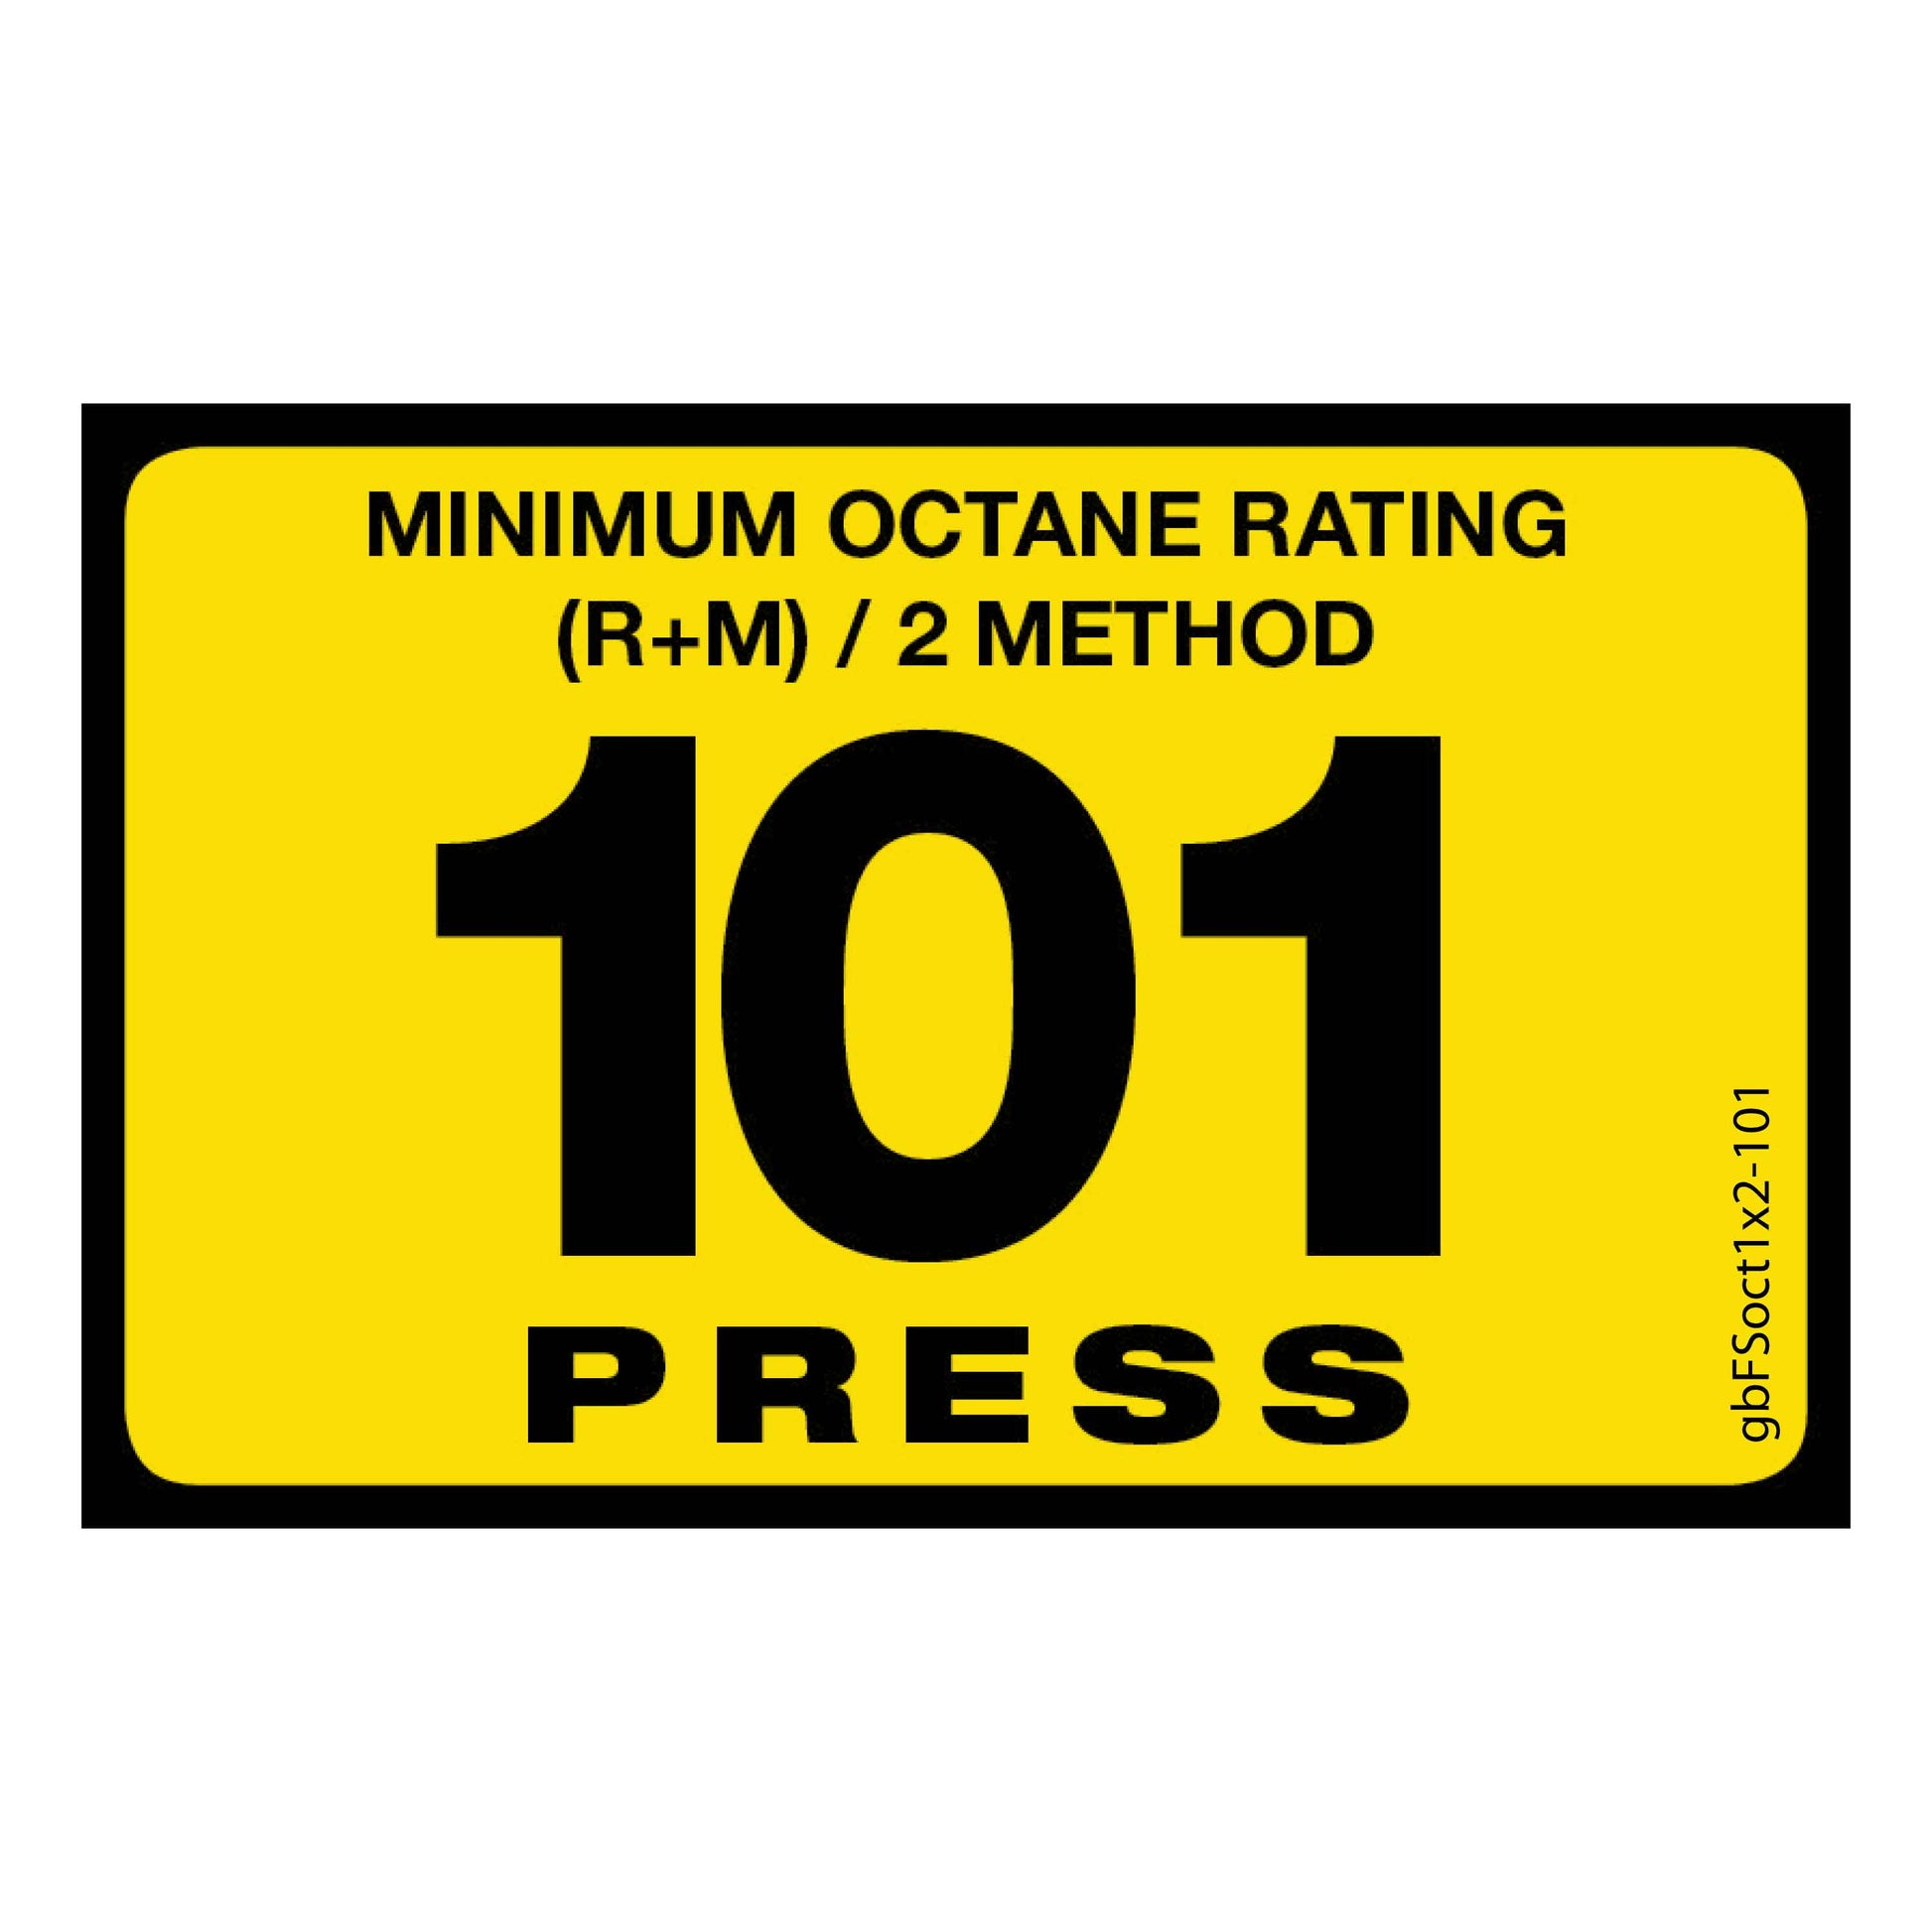 100 Press Octane Rating Decal. 1 inch by 2 inches in size. 